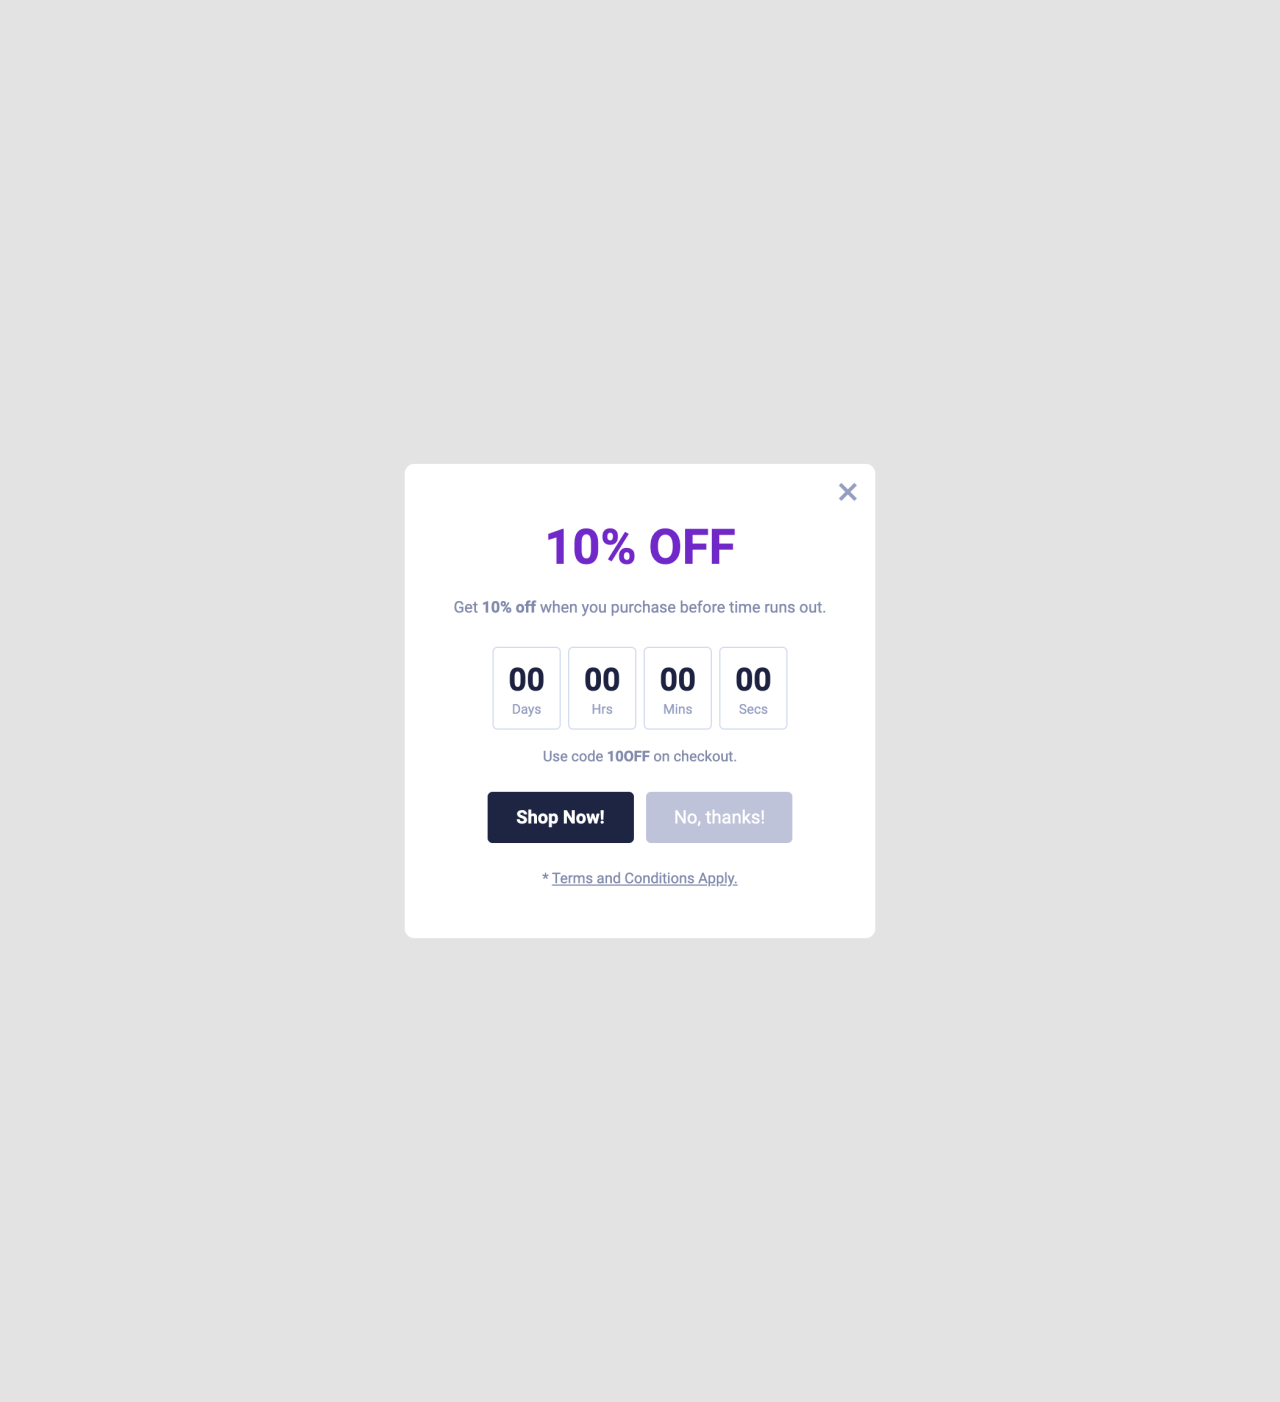 Countdown pop-up template - Made by MailerLite